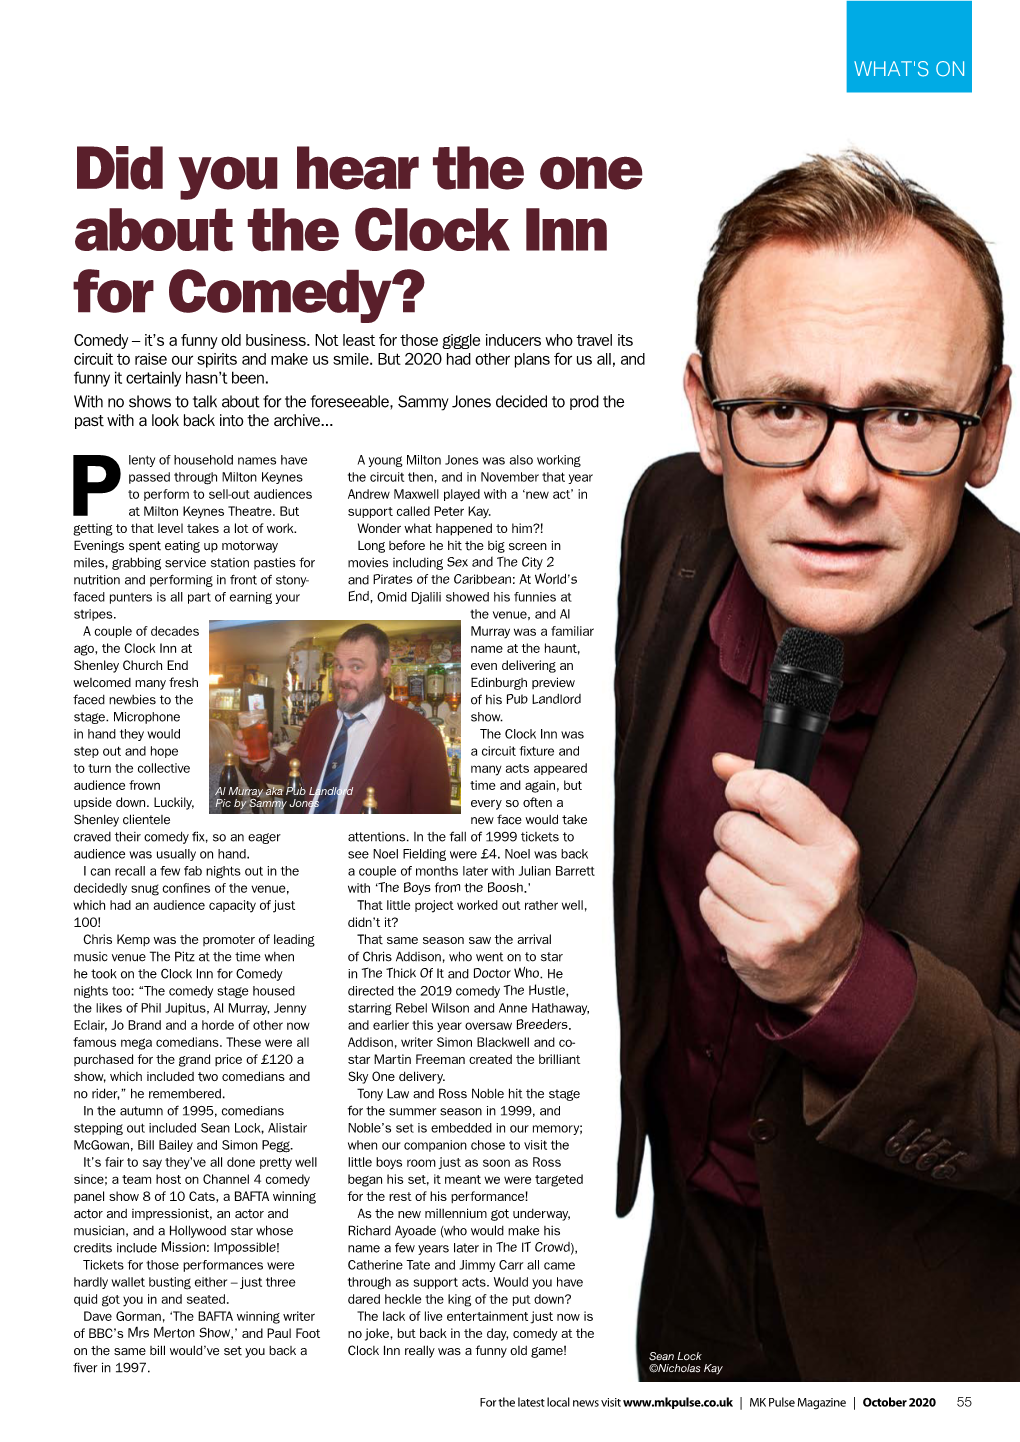 Did You Hear the One About the Clock Inn for Comedy? Comedy – It’S a Funny Old Business